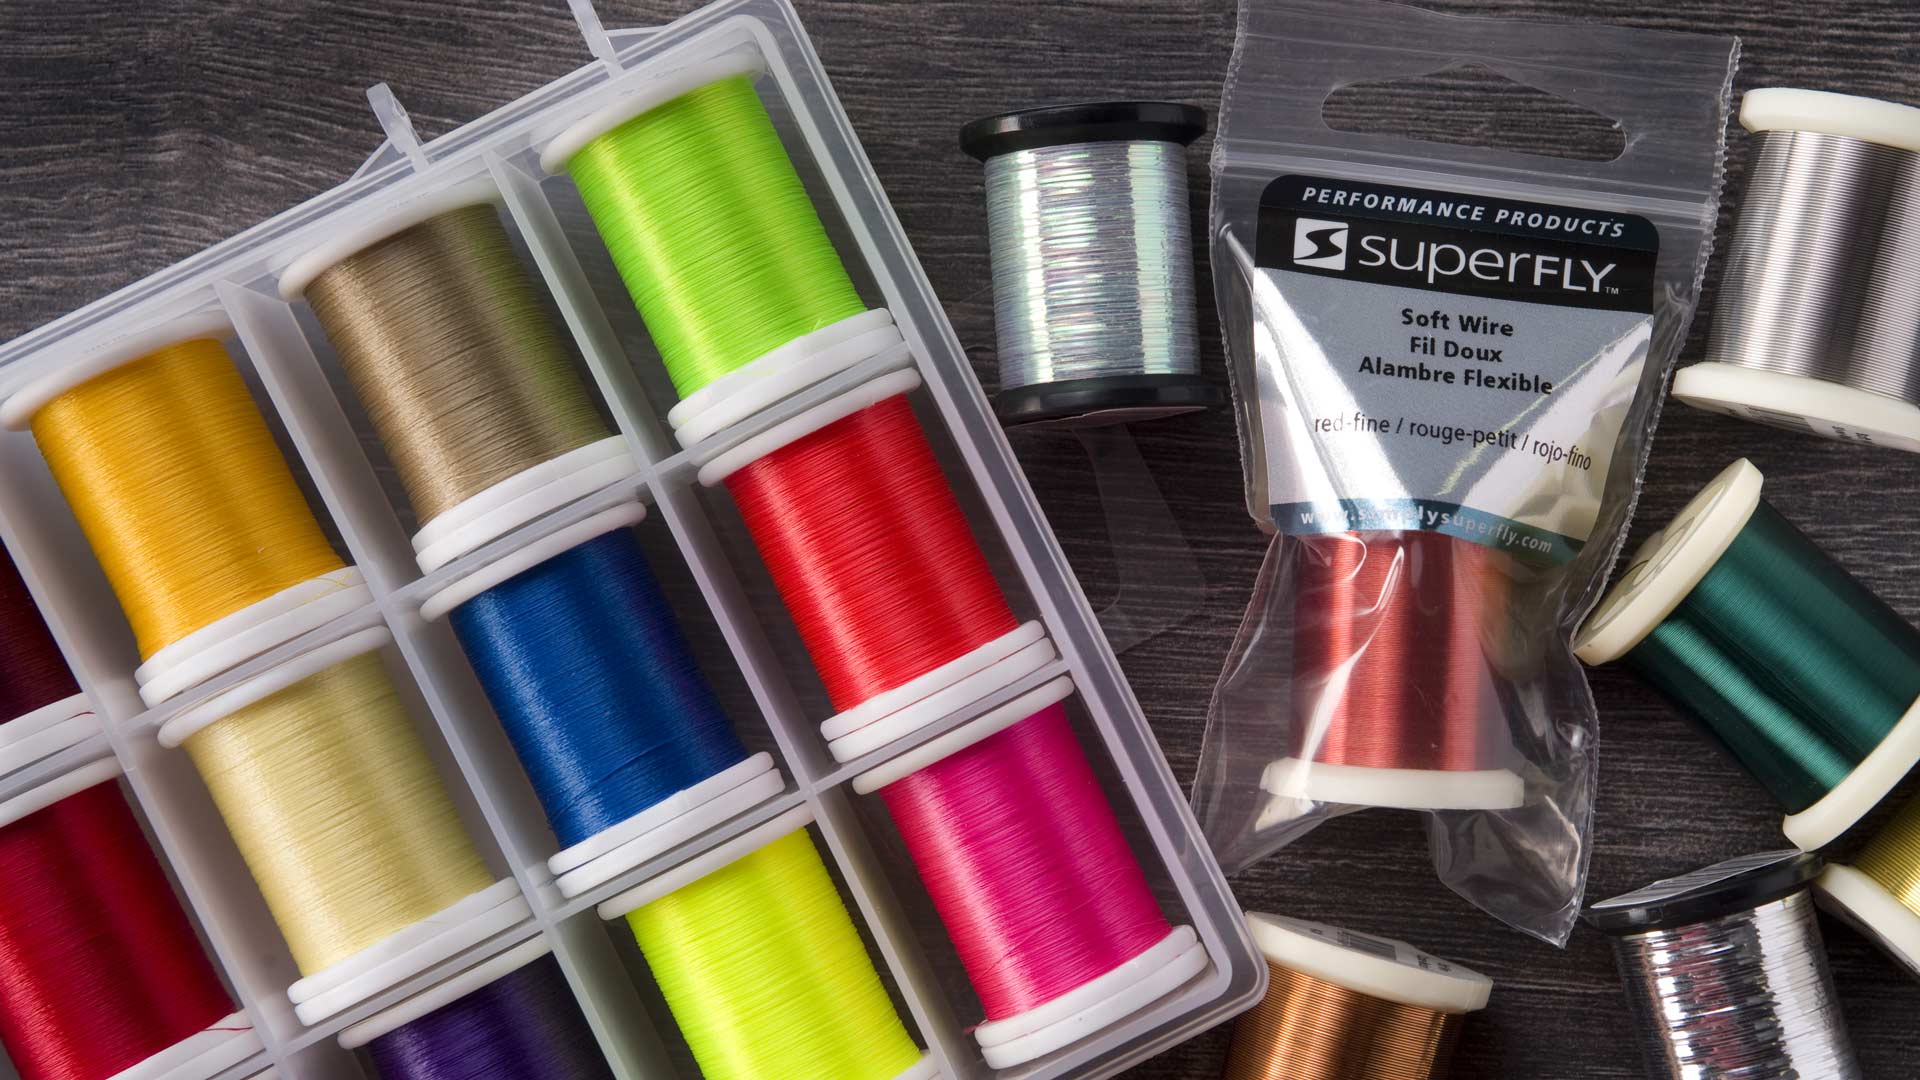 Superfly fly tying thread and wire